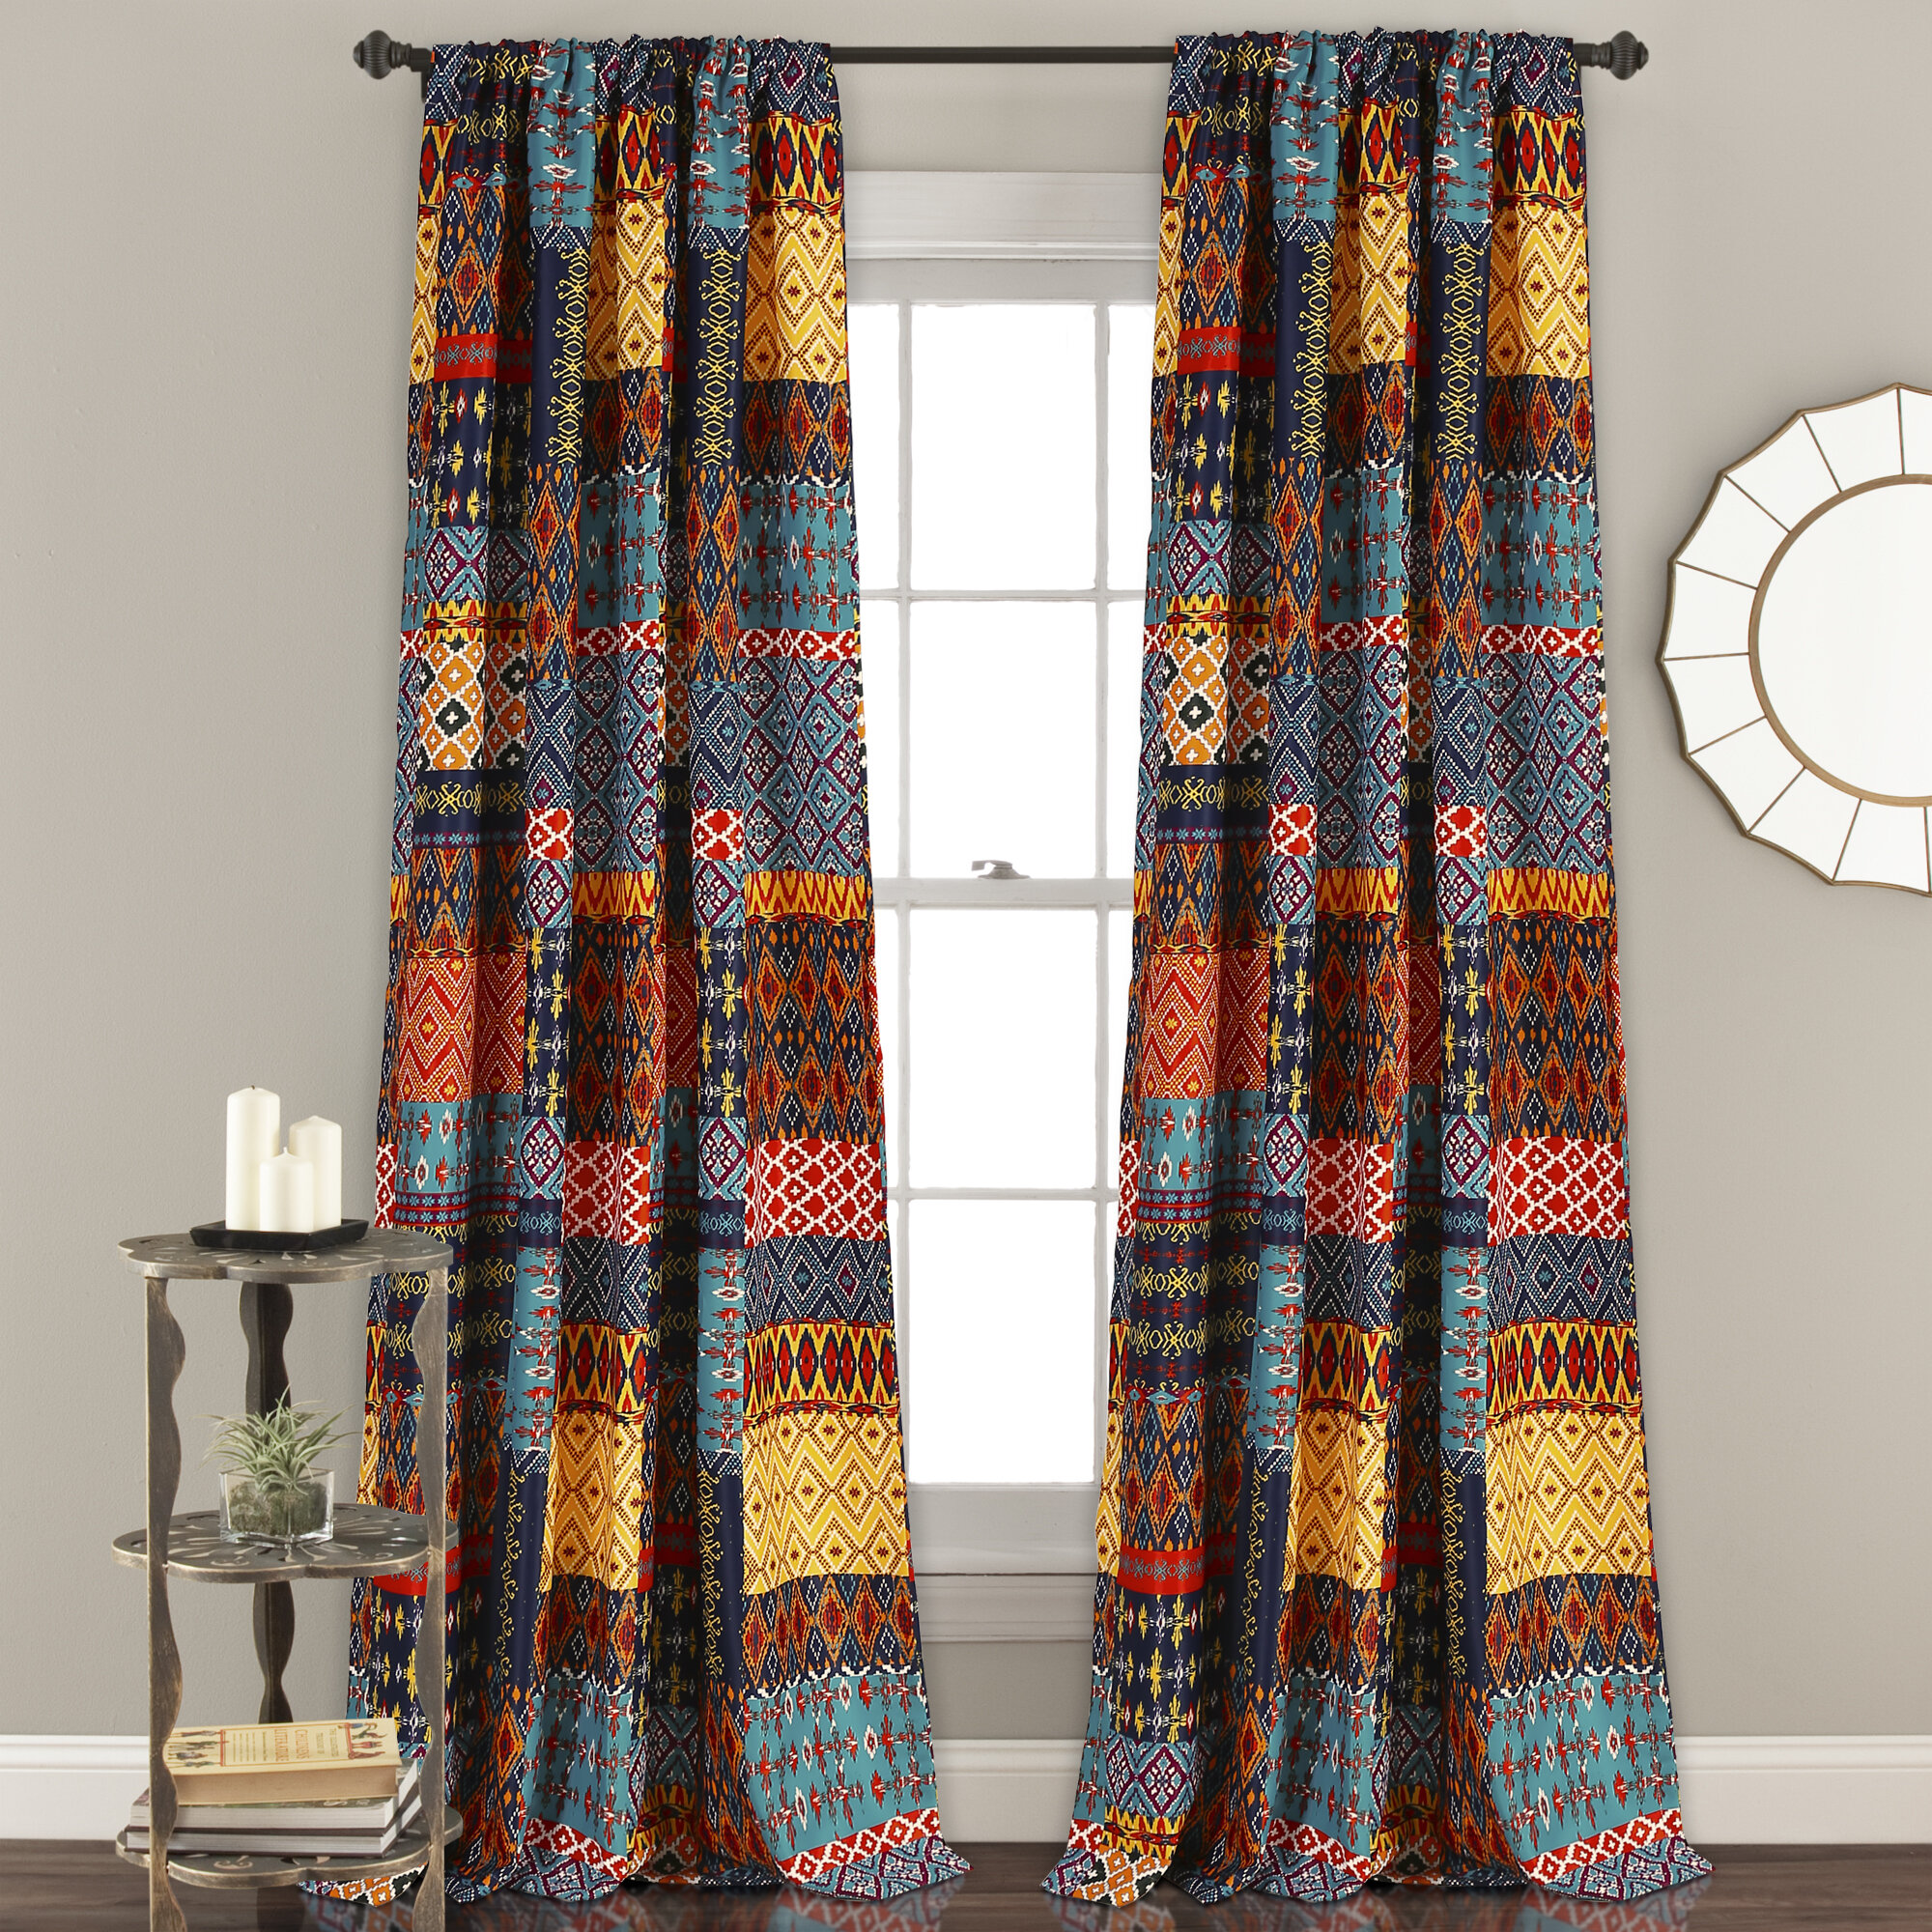 Bold Colors and Patterns Curtain for Living Room